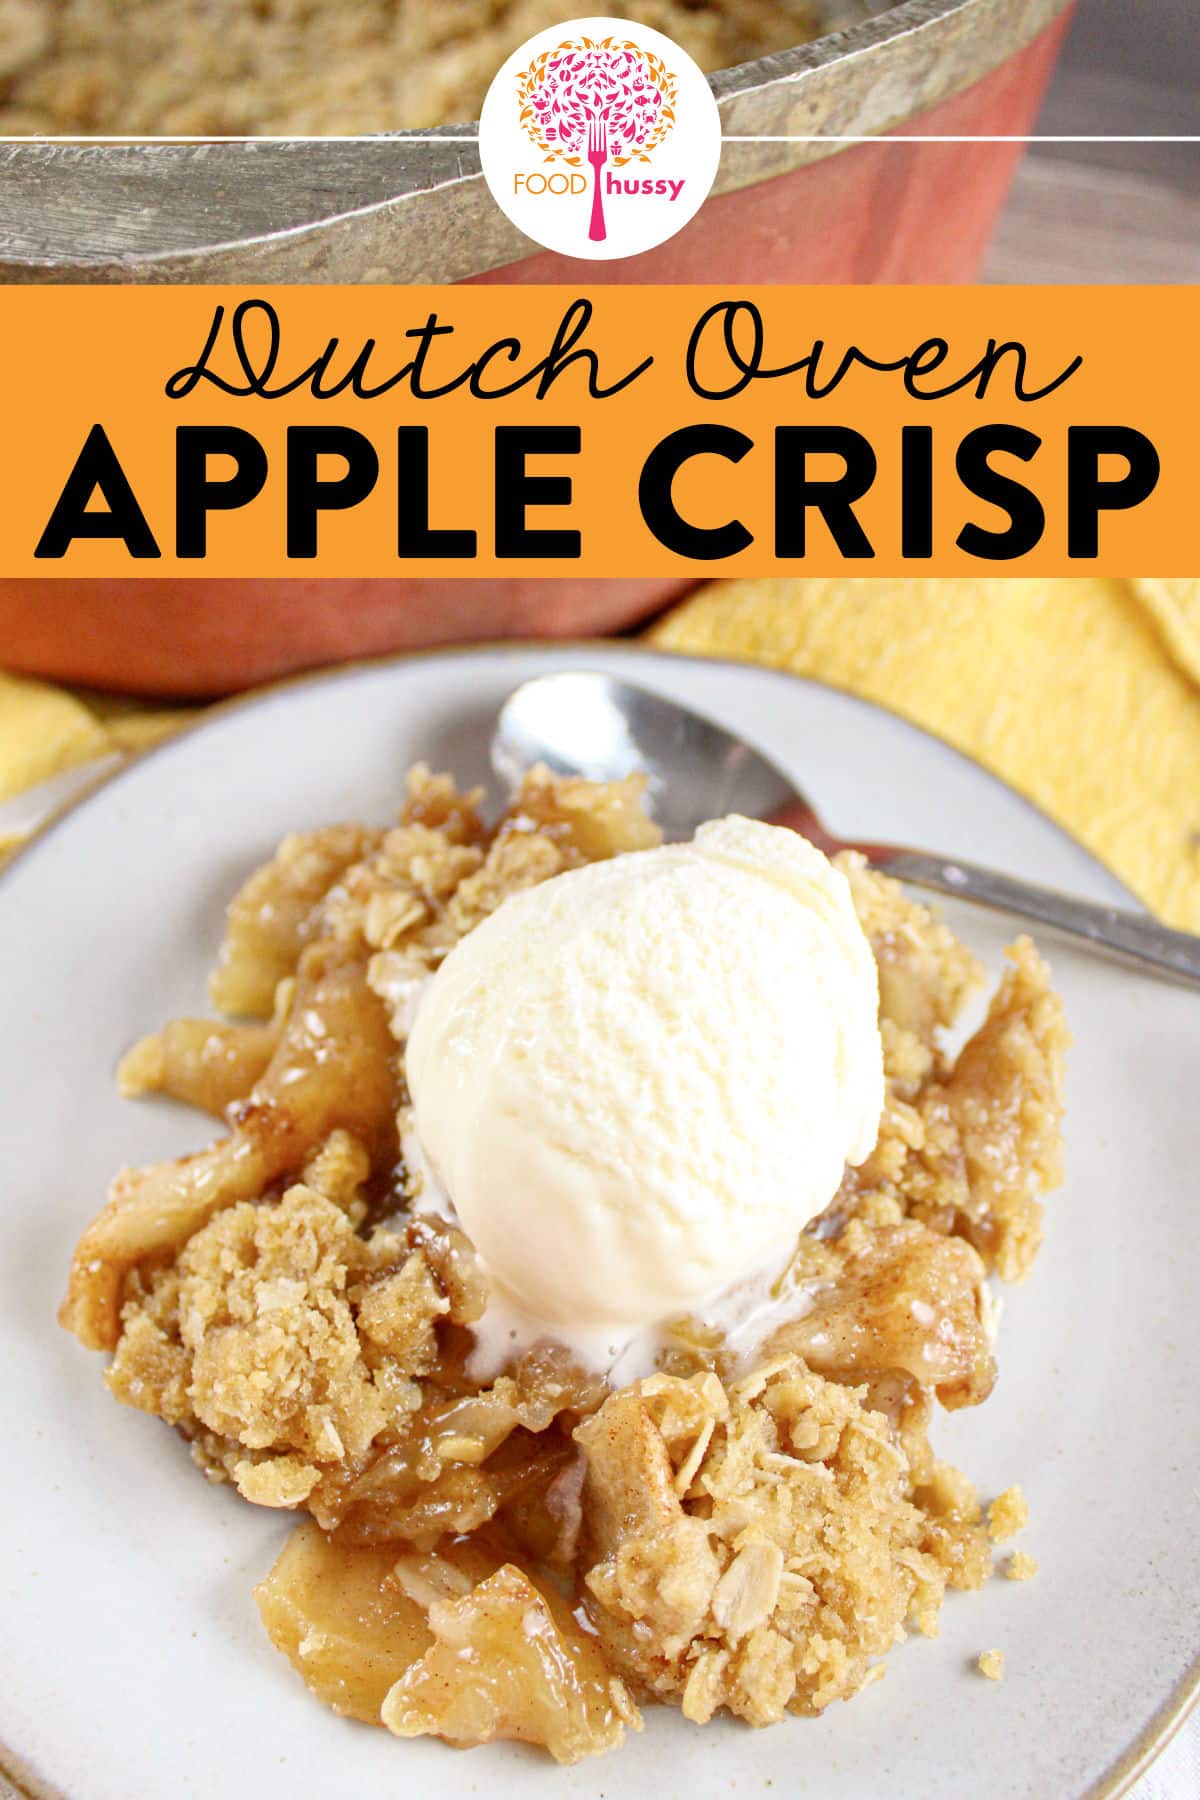 Dutch Oven Apple Crisp is comfort food at its best! Warm, cinnamon apples coated with crunchy sweet oat topping! Making this in the Dutch Oven just melts those apples into a puddle of yum! via @foodhussy